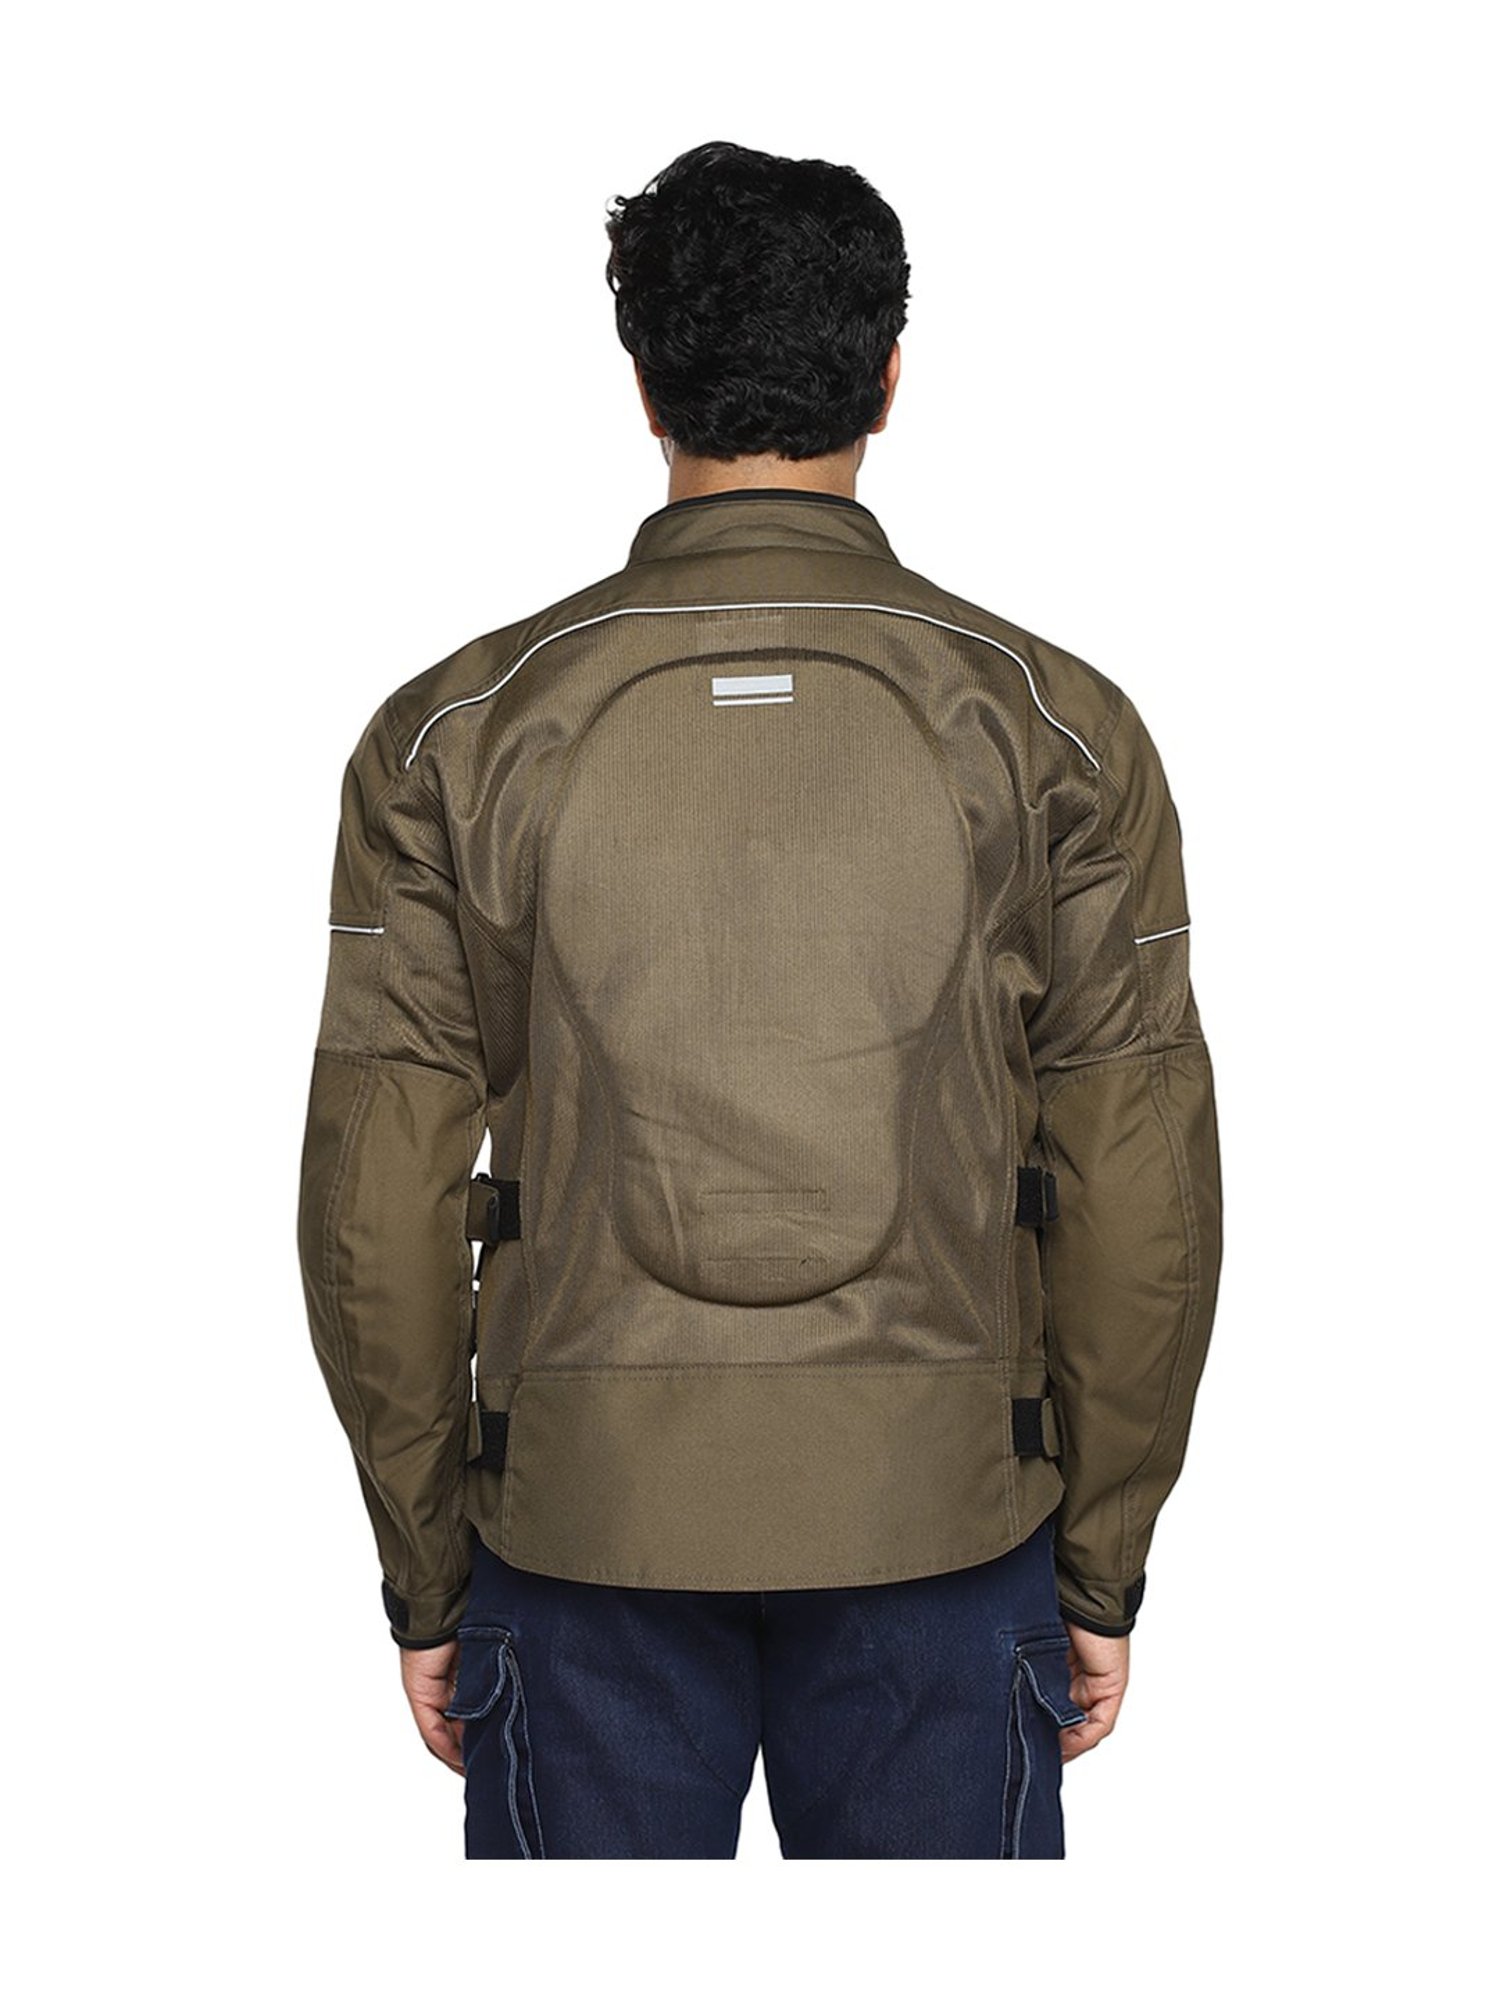 Royal Enfield-Ayodhya Faizabad-Chawla Riders Private Limited - Check out  the new #STREETWIND v2 Riding jacket @Rs 4950 only. With a soft mesh and  Knox Level 1 Flexiform armours around the shoulders and